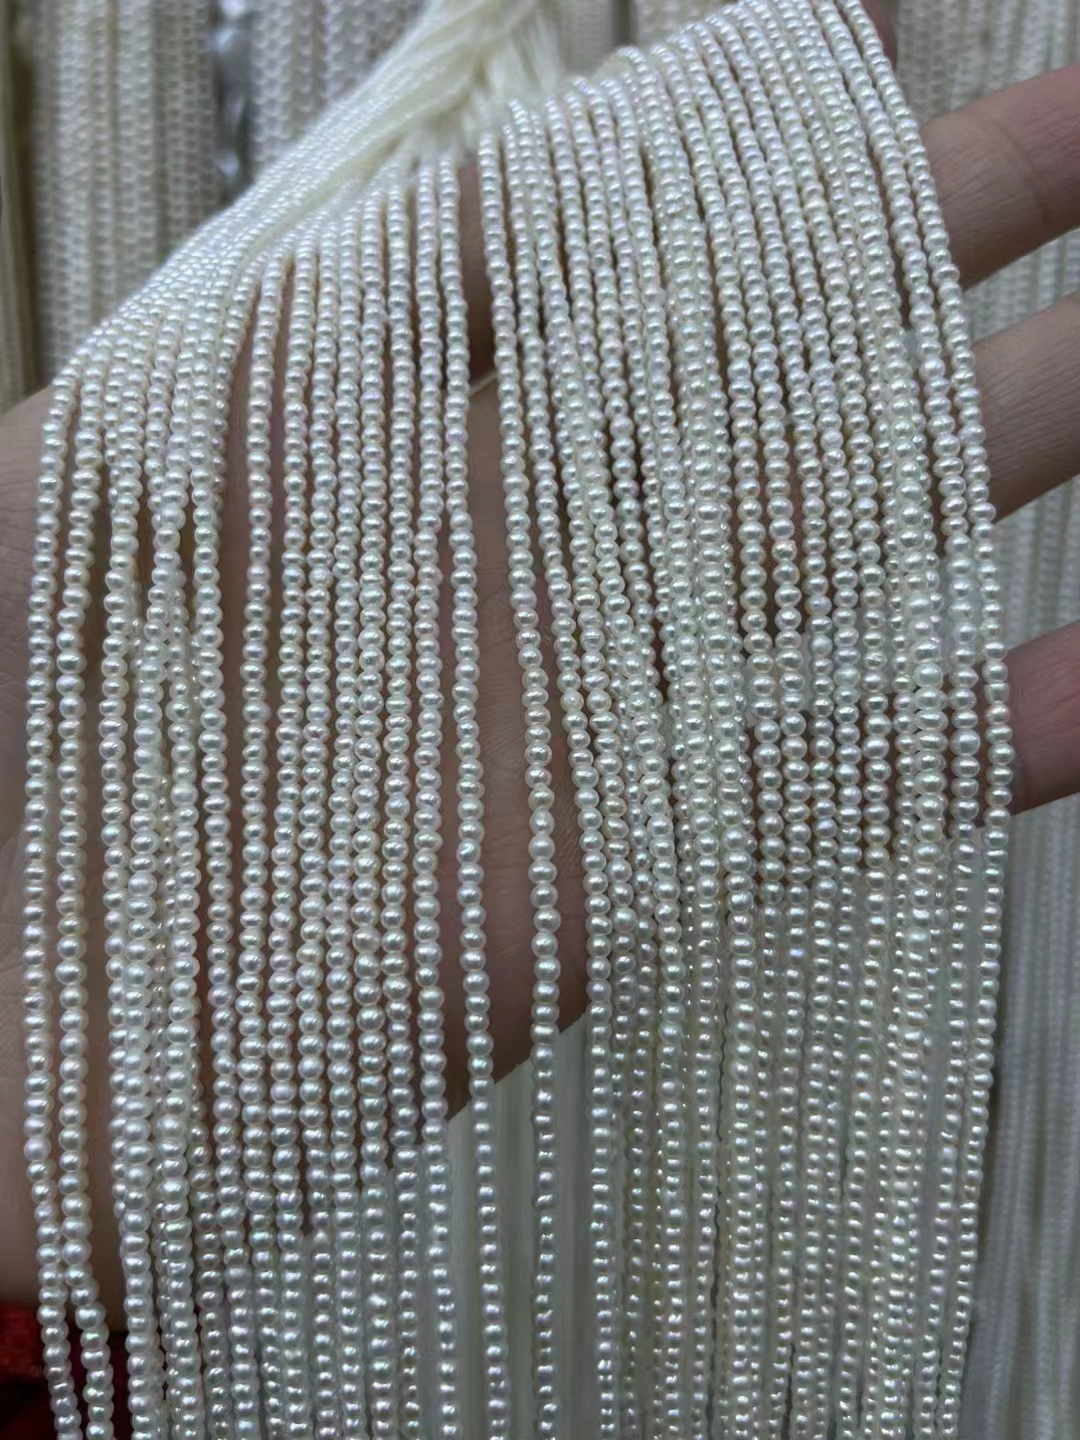 Natural freshwater pearl 2mm high quality pretty luster smooth surface white round strong bright pearl strands bulk sale